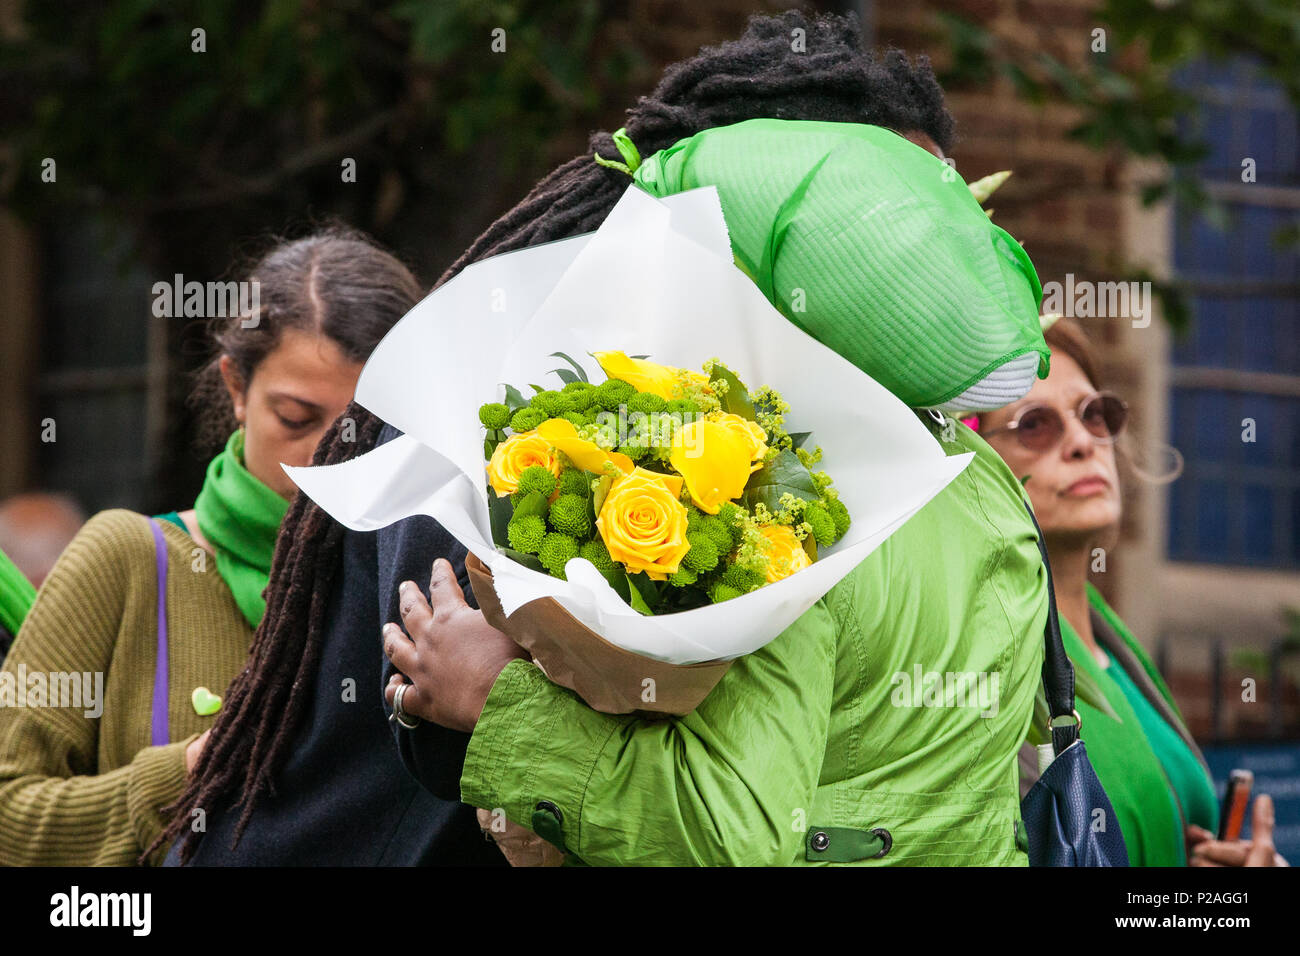 London, UK. 14th June, 2018. Members of the local community embrace as they prepare to release doves of peace outside St Helen's Church to mark the first anniversary of the Grenfell Tower Fire. Stock Photo